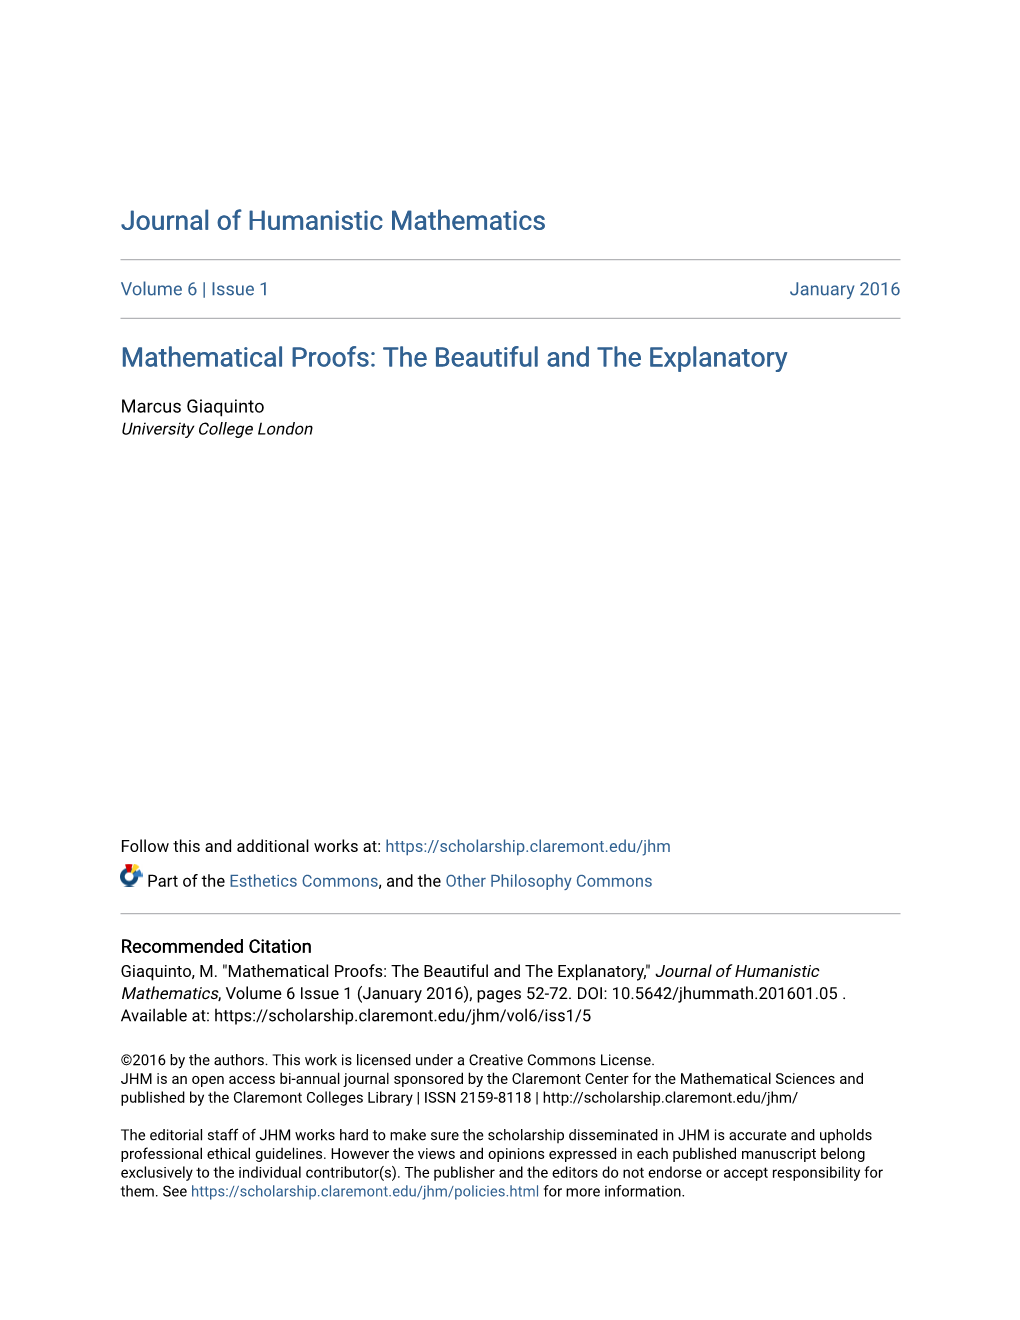 Mathematical Proofs: the Beautiful and the Explanatory